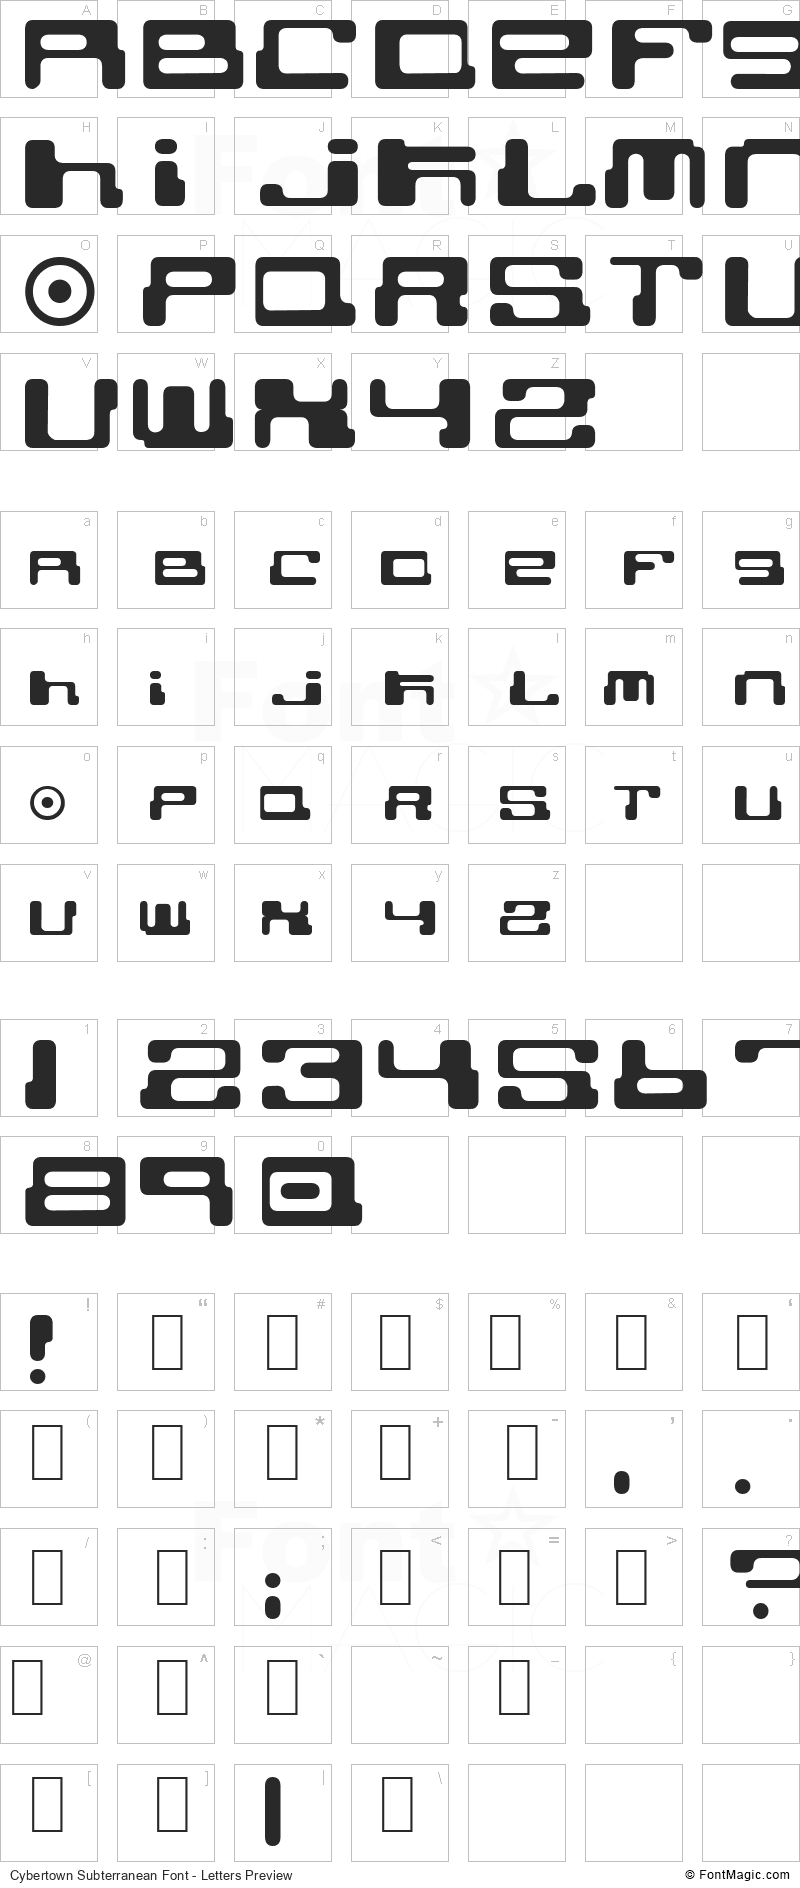 Cybertown Subterranean Font - All Latters Preview Chart